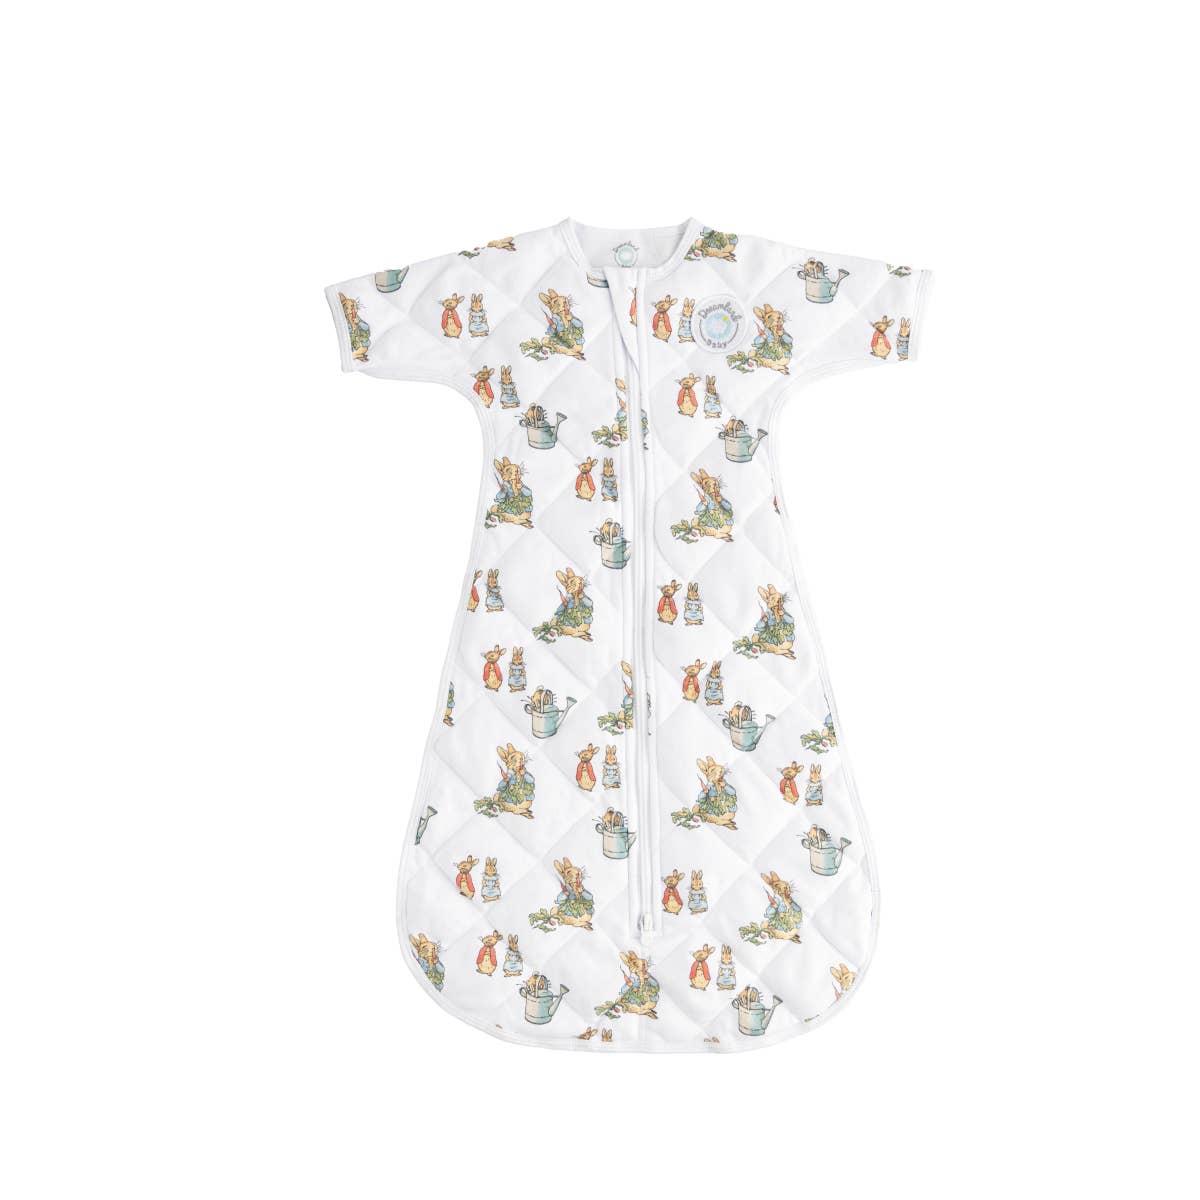 Dream Weighted Transition Swaddle - Peter Rabbit